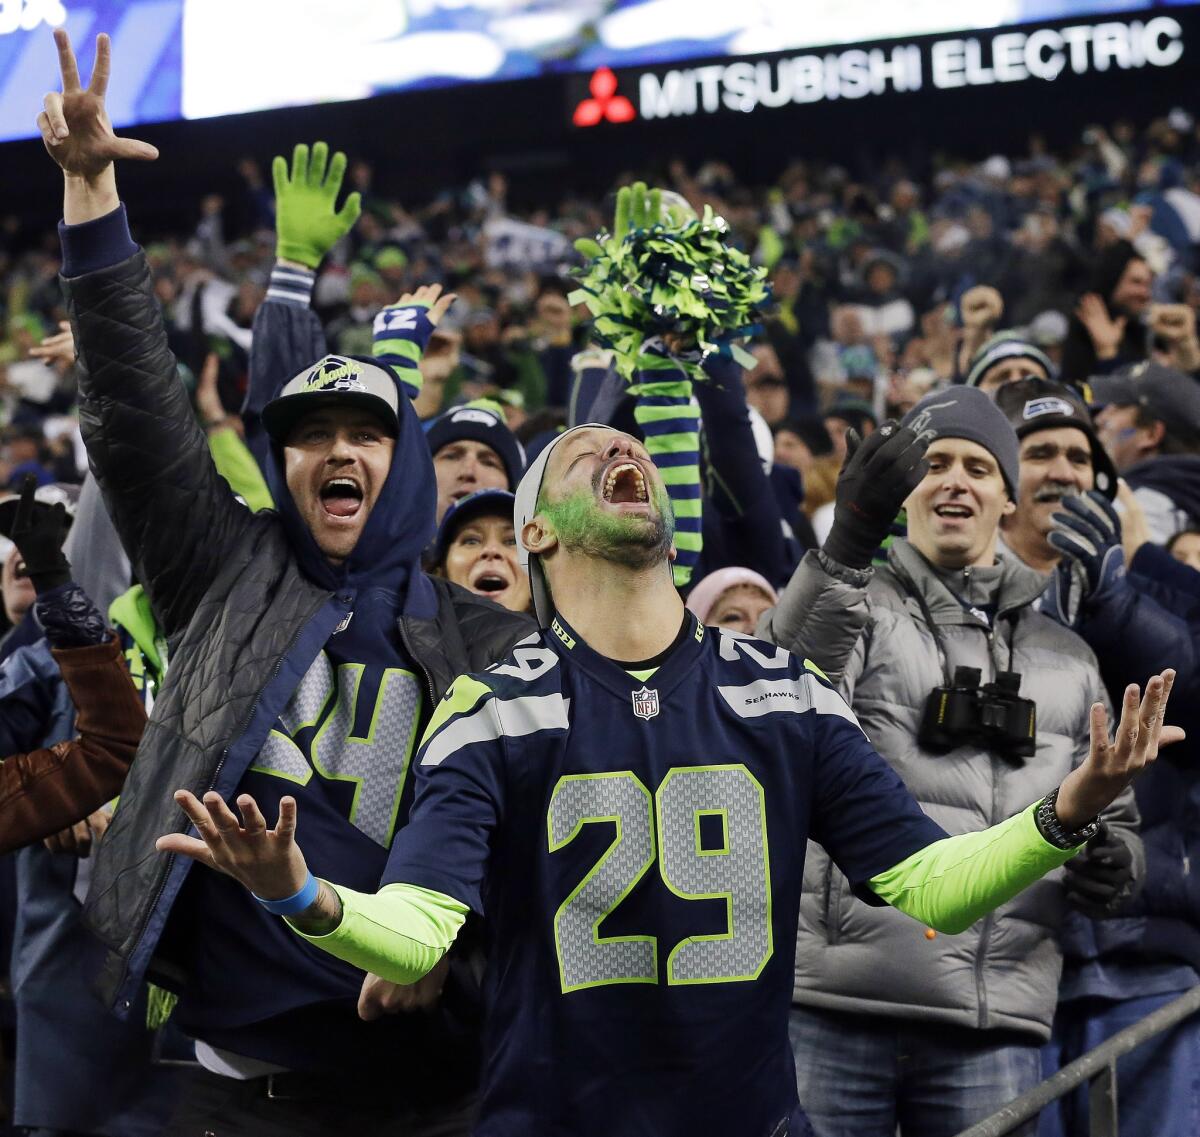 A recent survey found that smartphone users who are rooting for the Seahawks to win the Super Bowl have more accidents with their devices than users who are rooting for the Broncos.